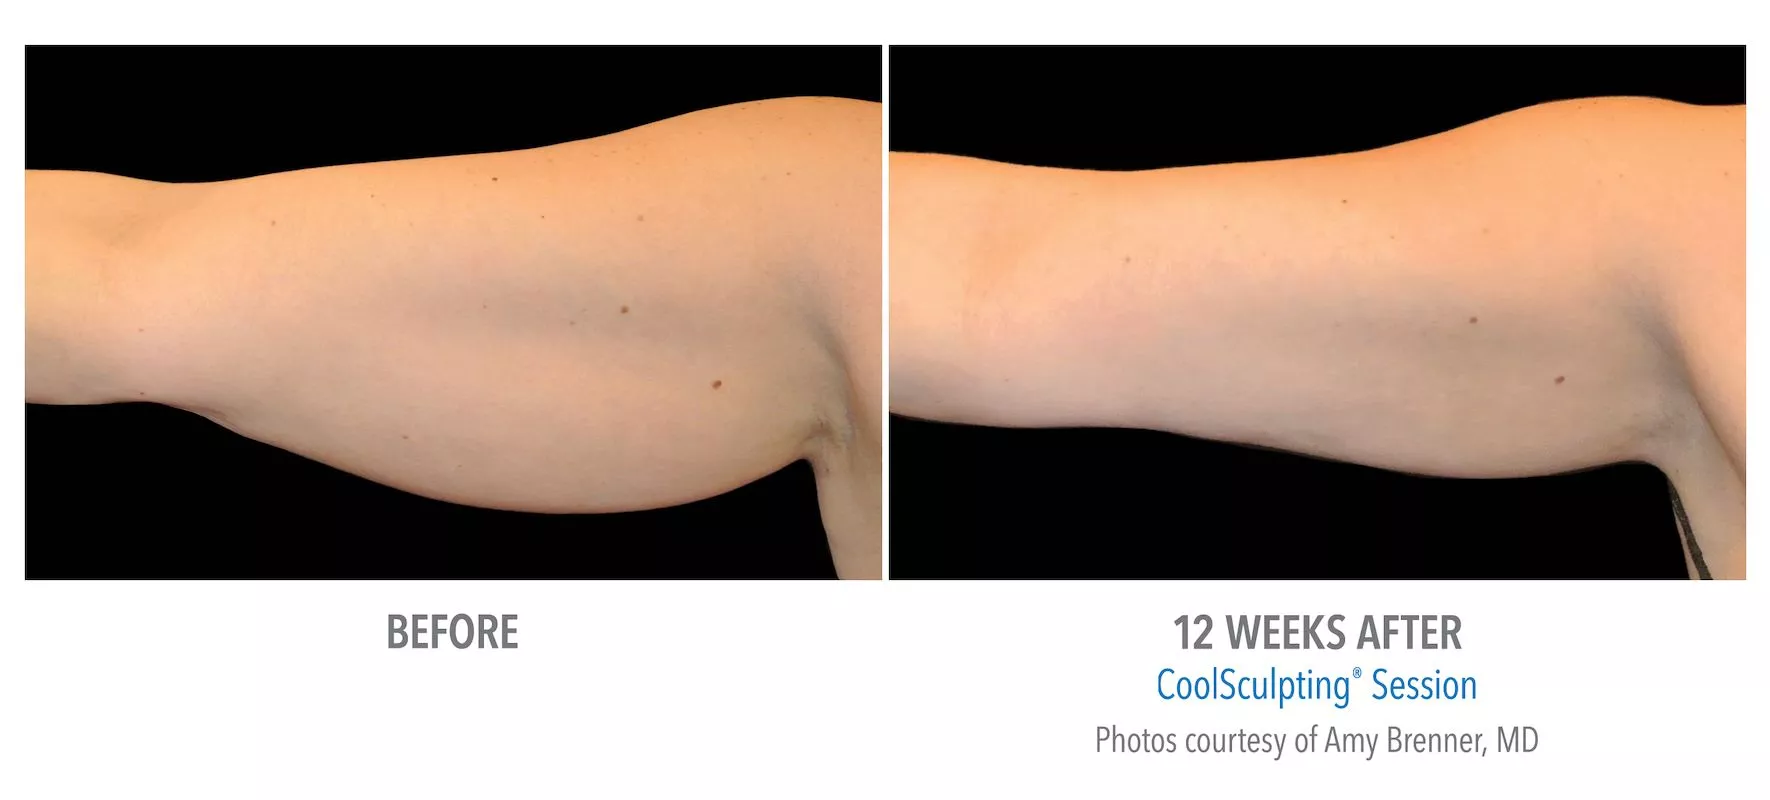 Female CoolSculpting patient in Las Vegas. Before and after photo of arms post CoolSculpting treatment.